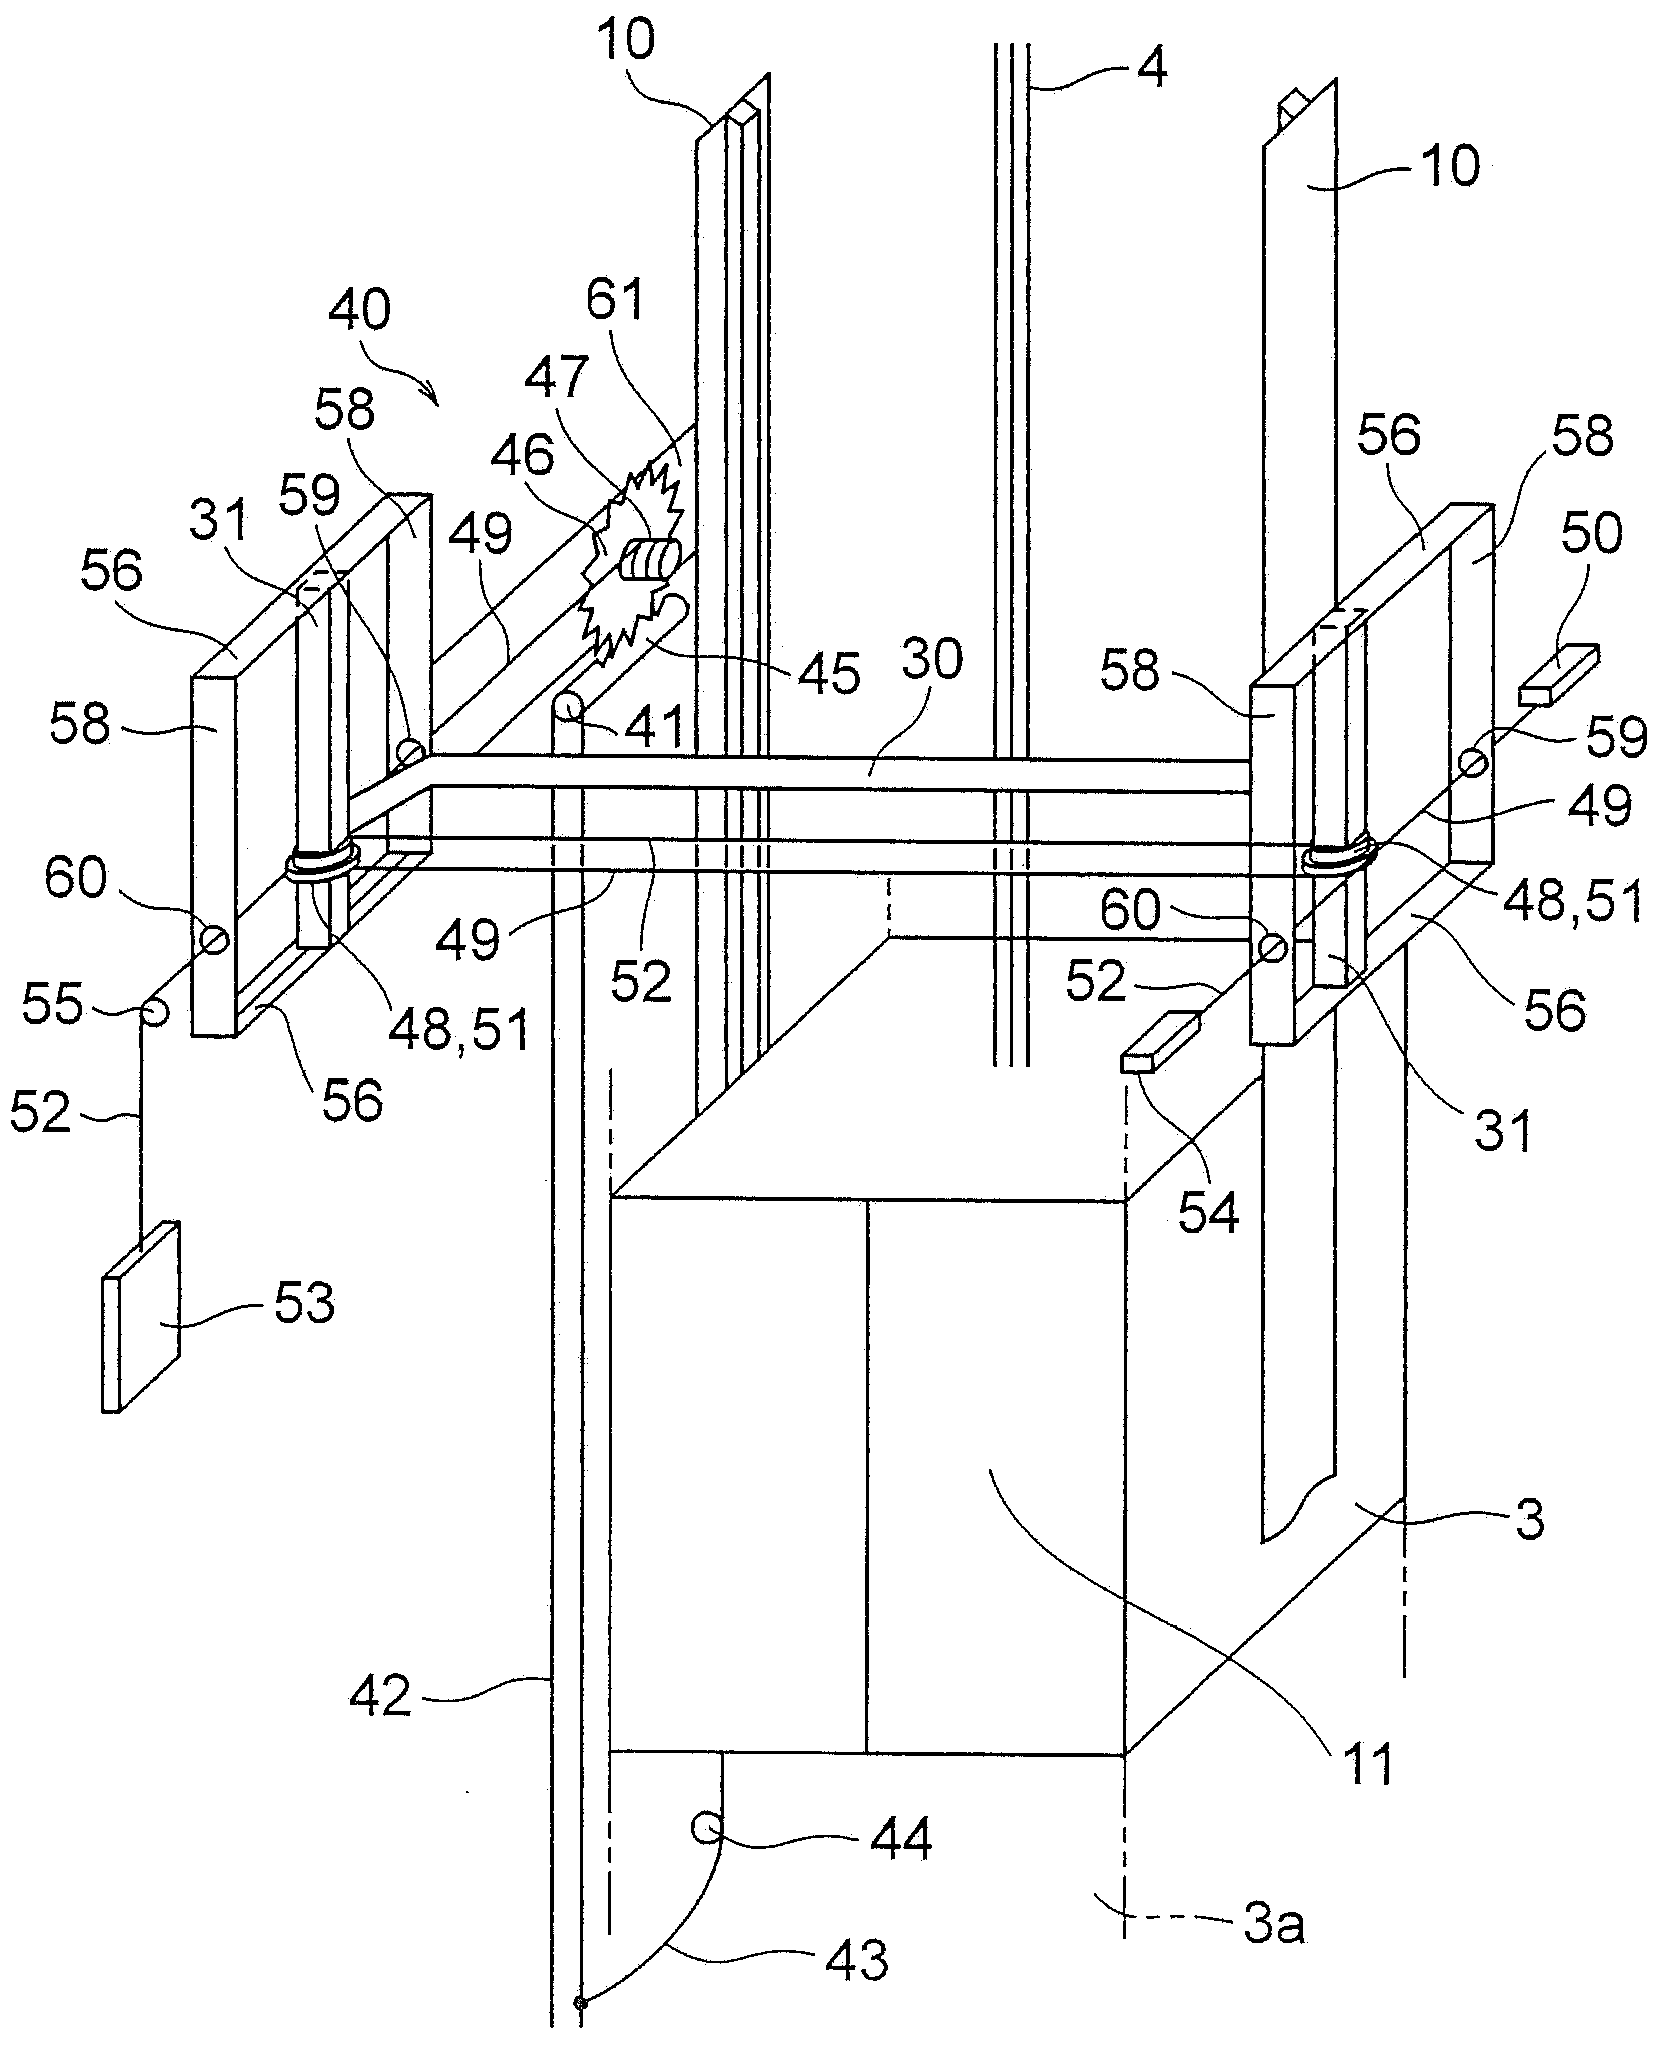 Elevator cable swing suppression system